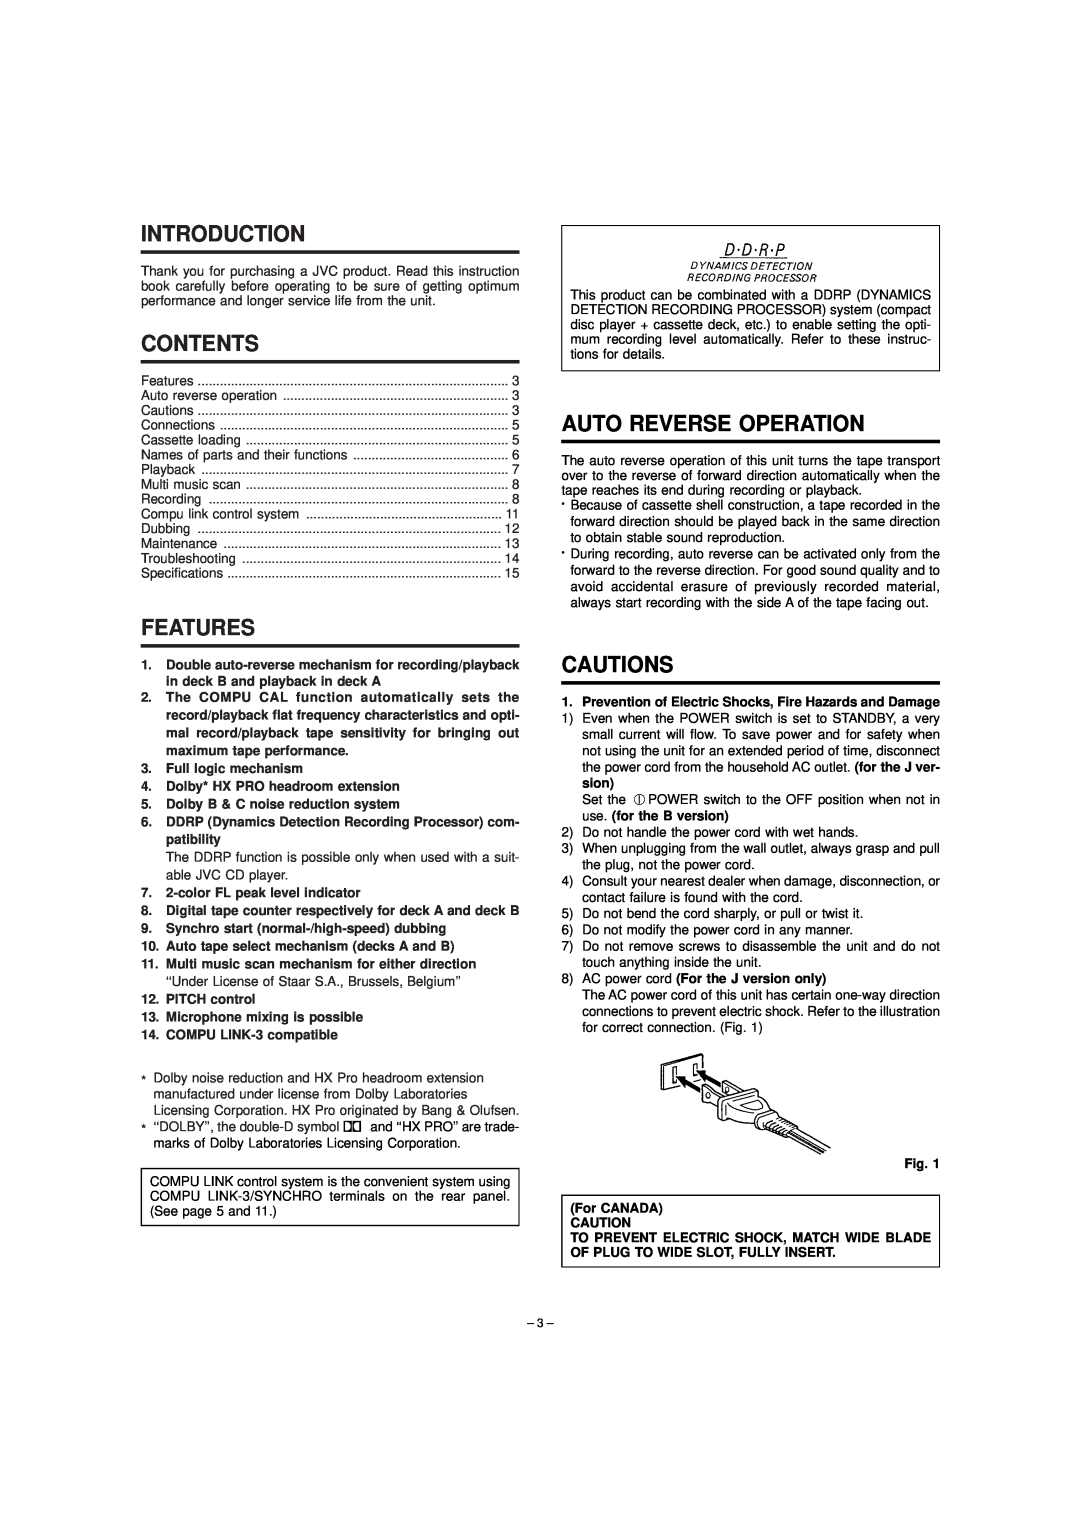 JVC TD-W354 manual Introduction, Contents, Features, Auto Reverse Operation, Cautions 